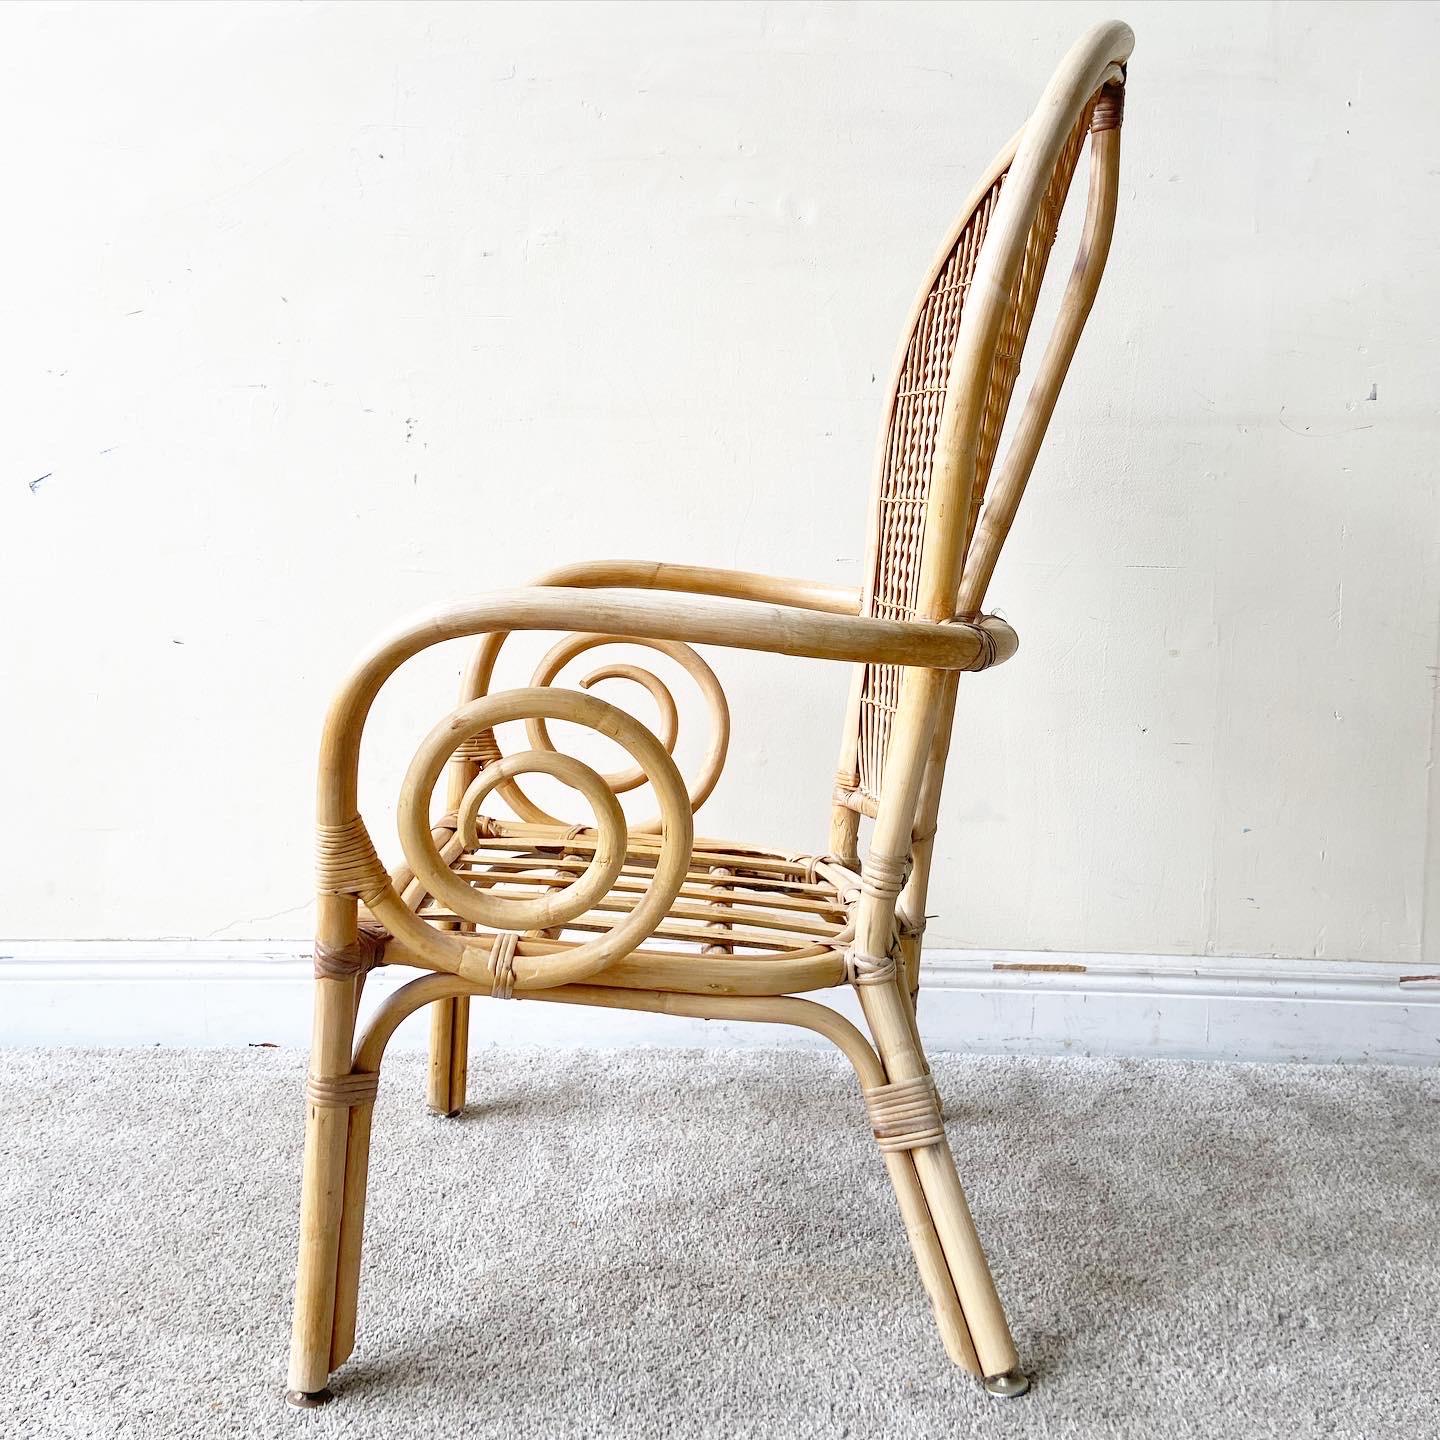 Incredible set of 3 bamboo rattan arm chairs. Each features a balloon back and swirling spiral bamboo arm rest.

Additional Information:
Material: Bamboo, Rattan
Color: Brown
Style: Boho Chic
Time Period: 1980s
Dimension: 26